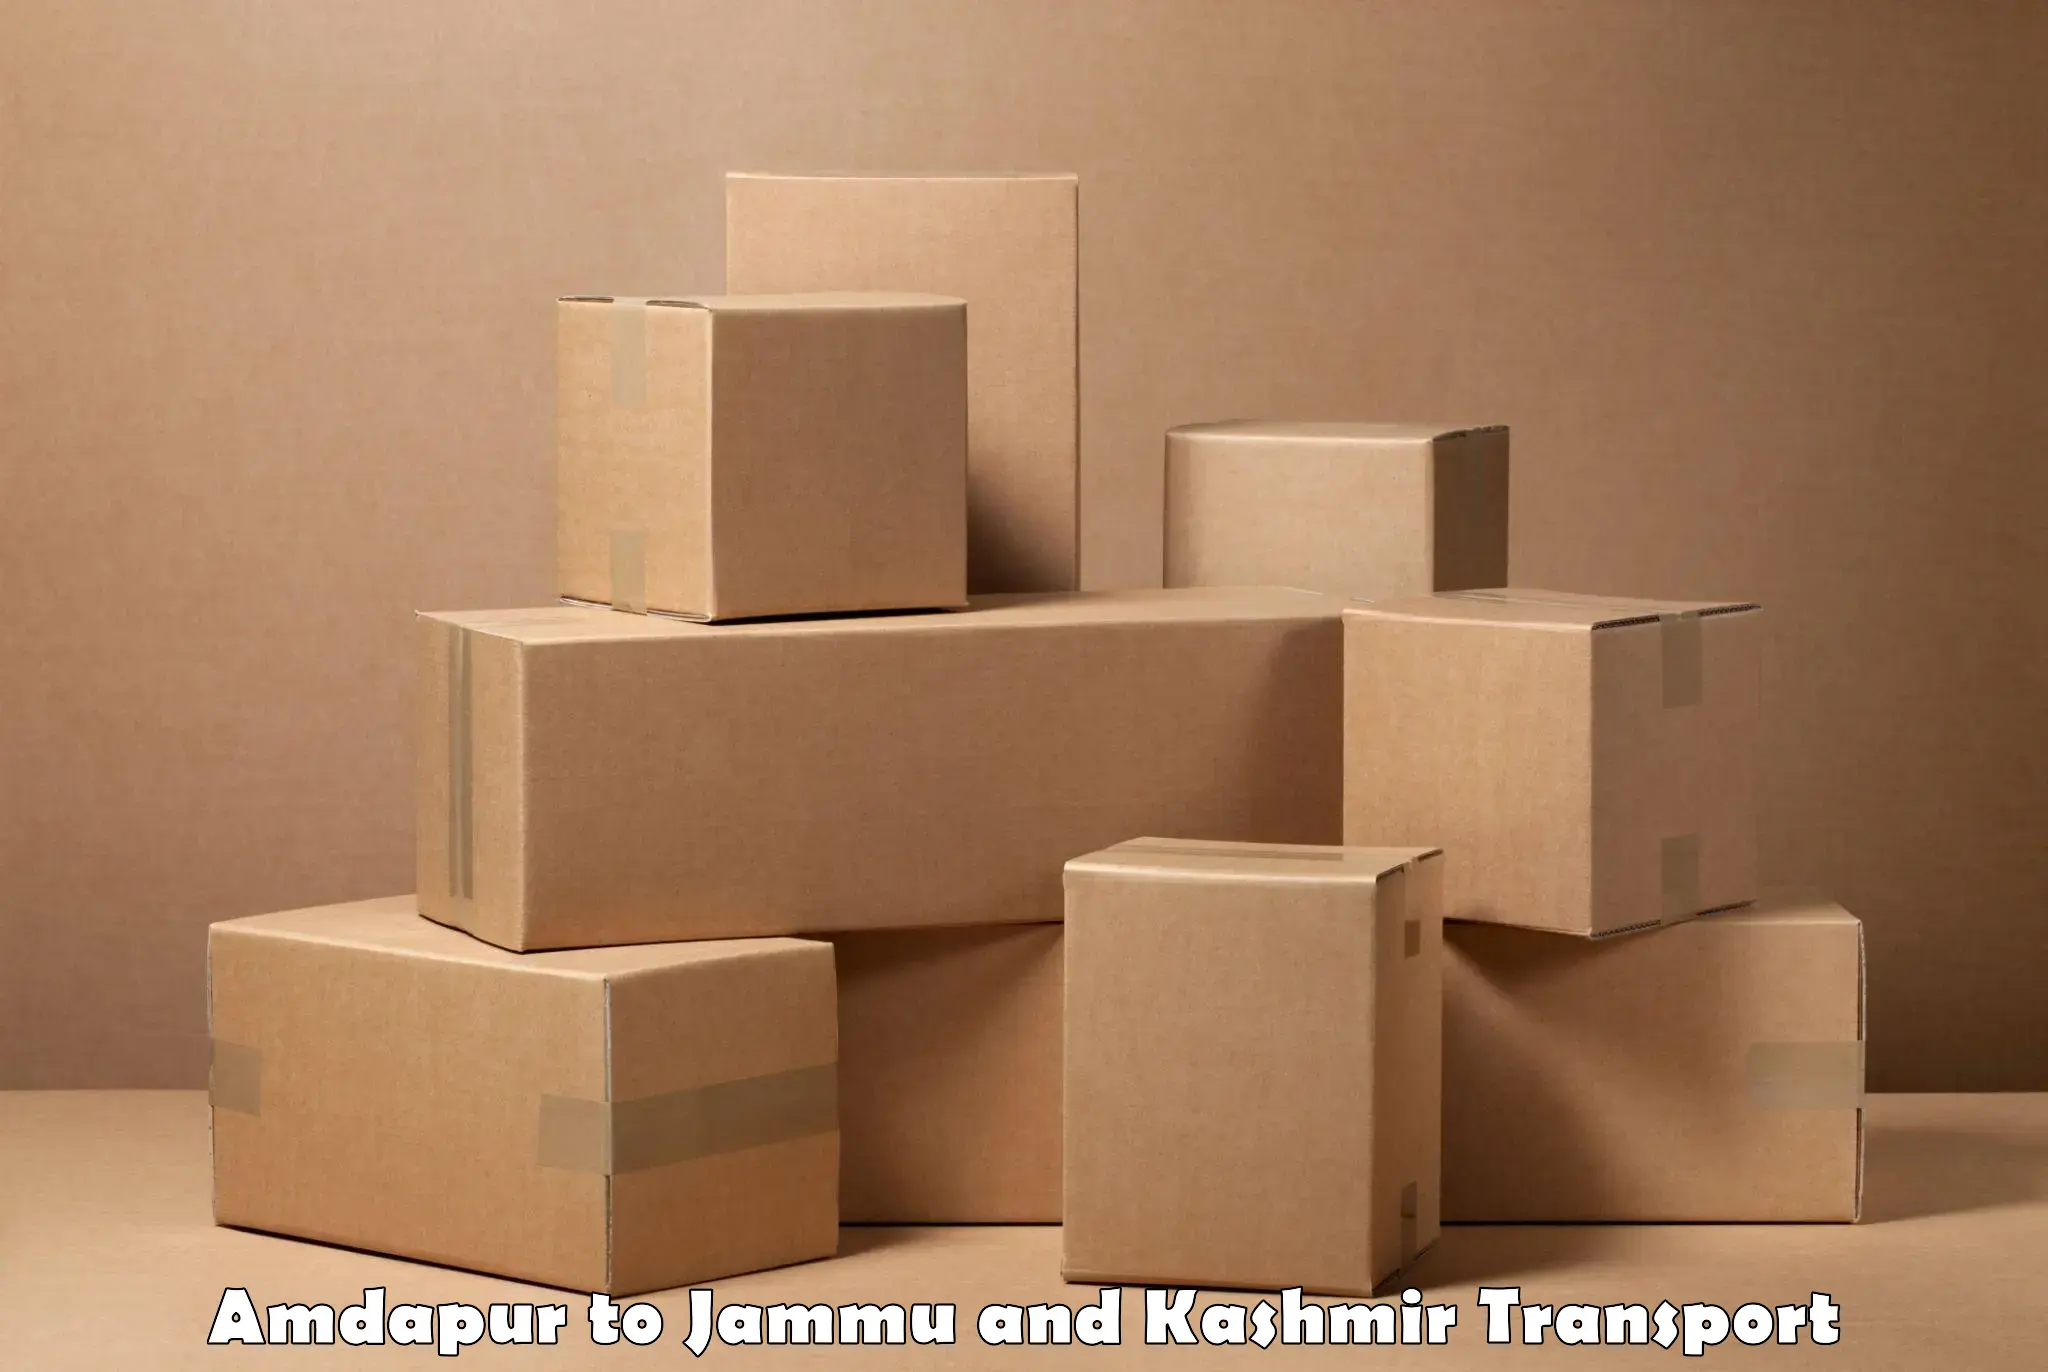 Container transport service Amdapur to Leh